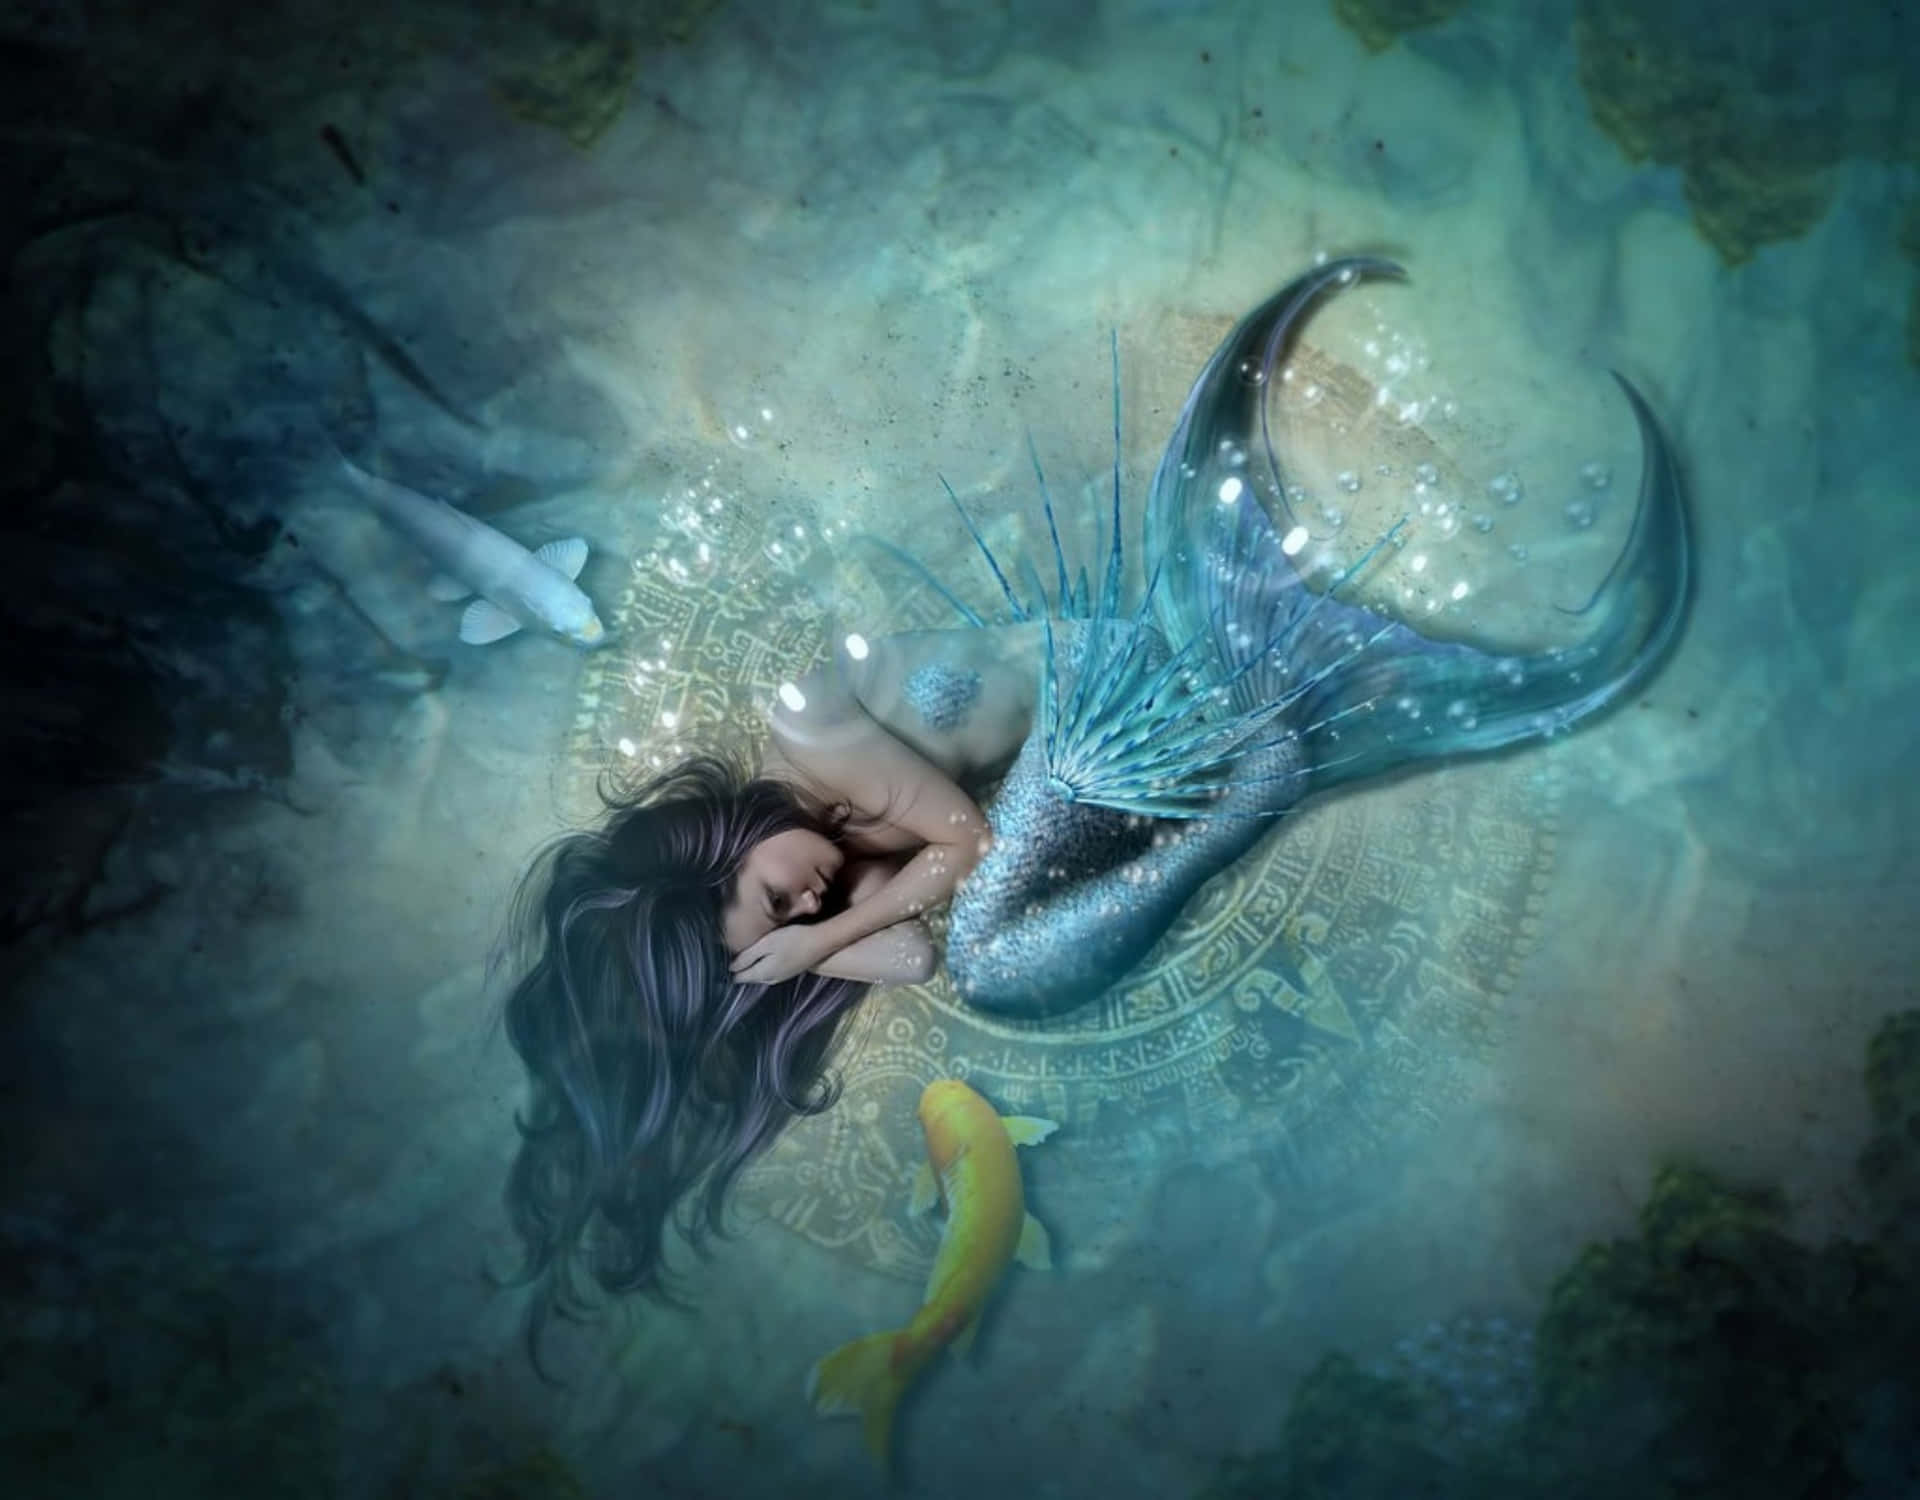 A mermaid peacefully sleeping surrounded by coral reefs